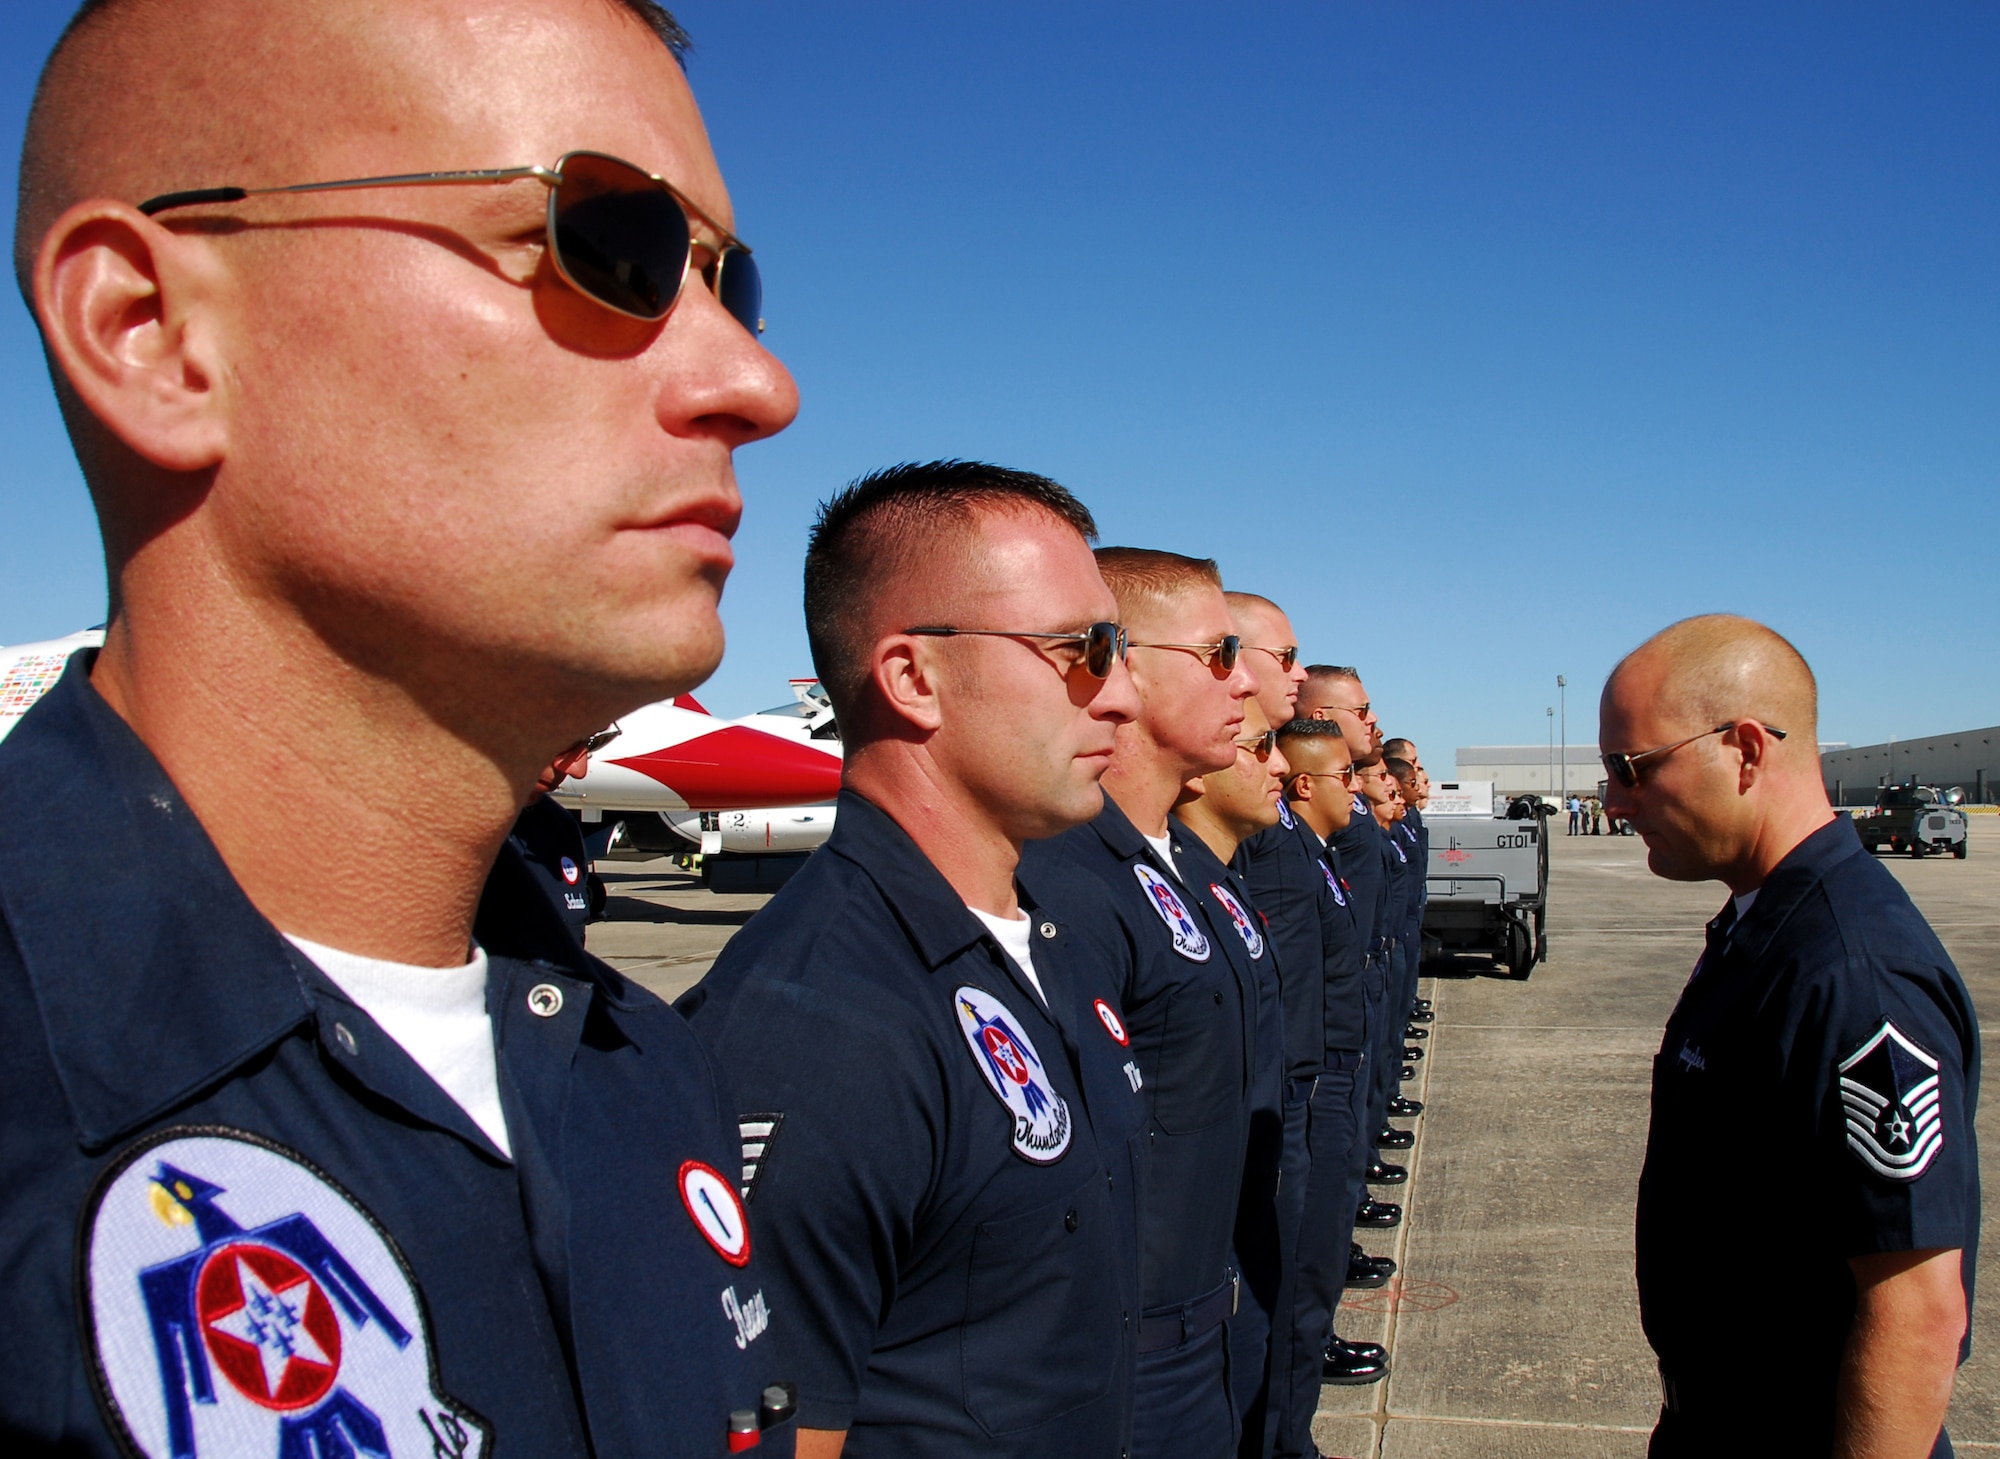 Before starting their aircraft pre-inspections Nov. 5, 2010, for an air show taking place Nov. 6 and 7 at Lackland Air Force Base, Texas, Air Force Thunderbird maintainers are inspected during open ranks. The Thunderbirds team is made up of 12 officers and more than 120 enlisted maintenance and support Airmen. (U.S. Air Force photo/Staff Sgt. Jamie Powell)